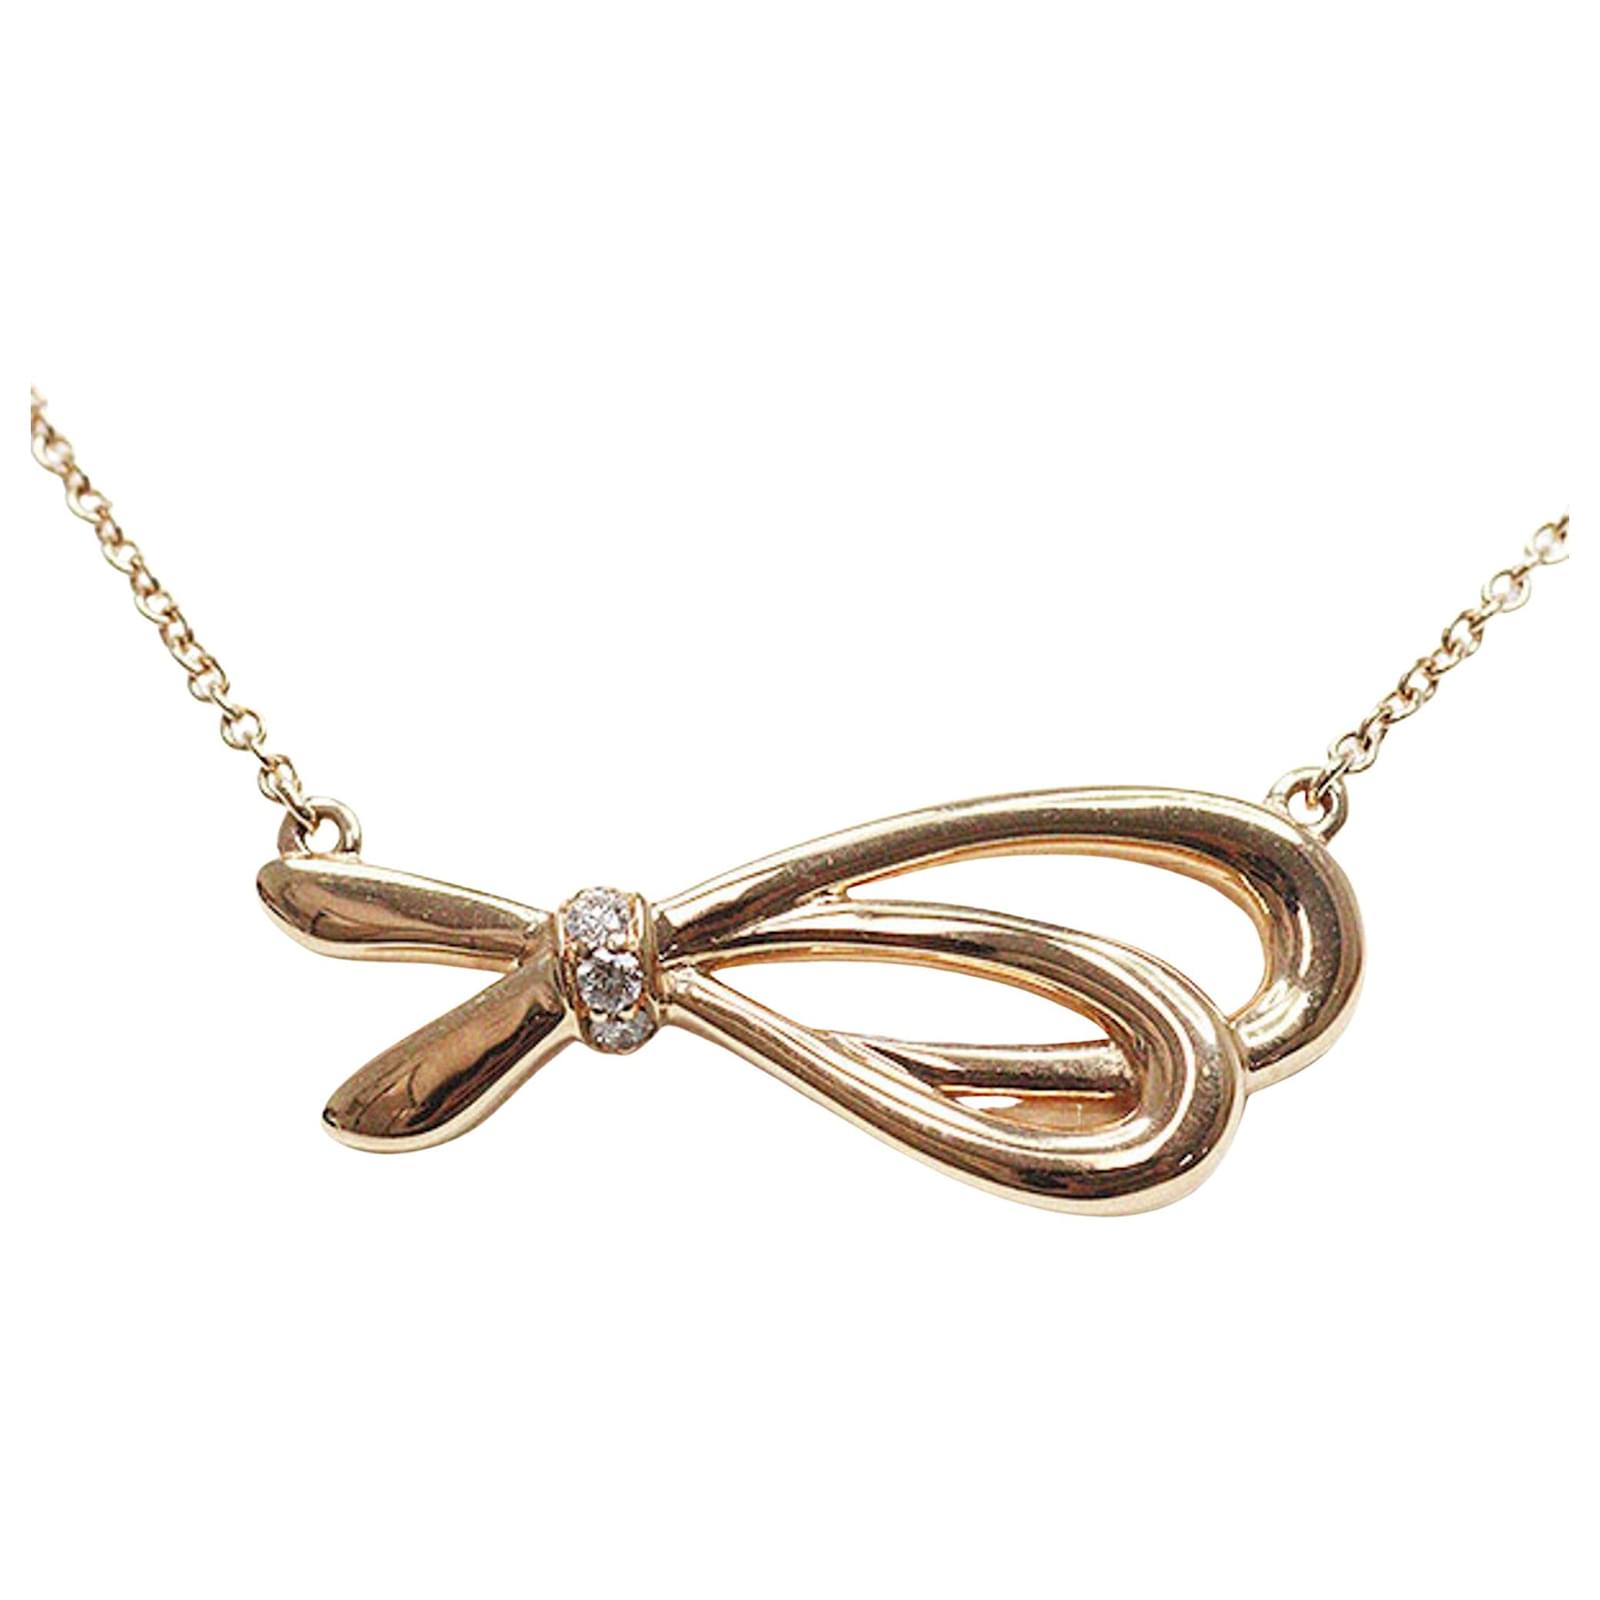 Tiffany & Co 18K Gold Bow Chain Necklace